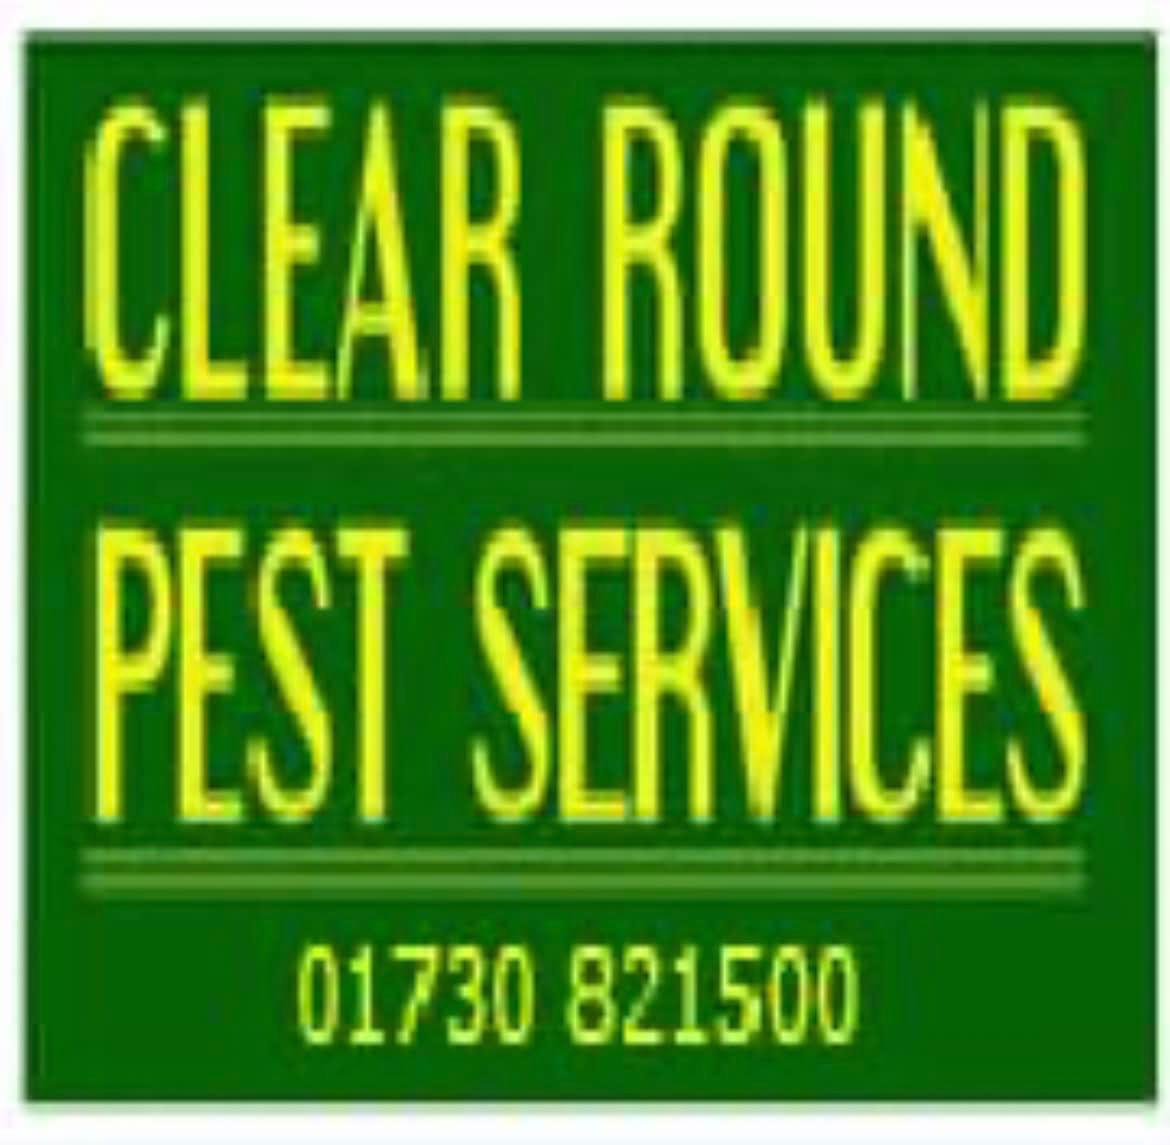 Images Clear Round Pest Services